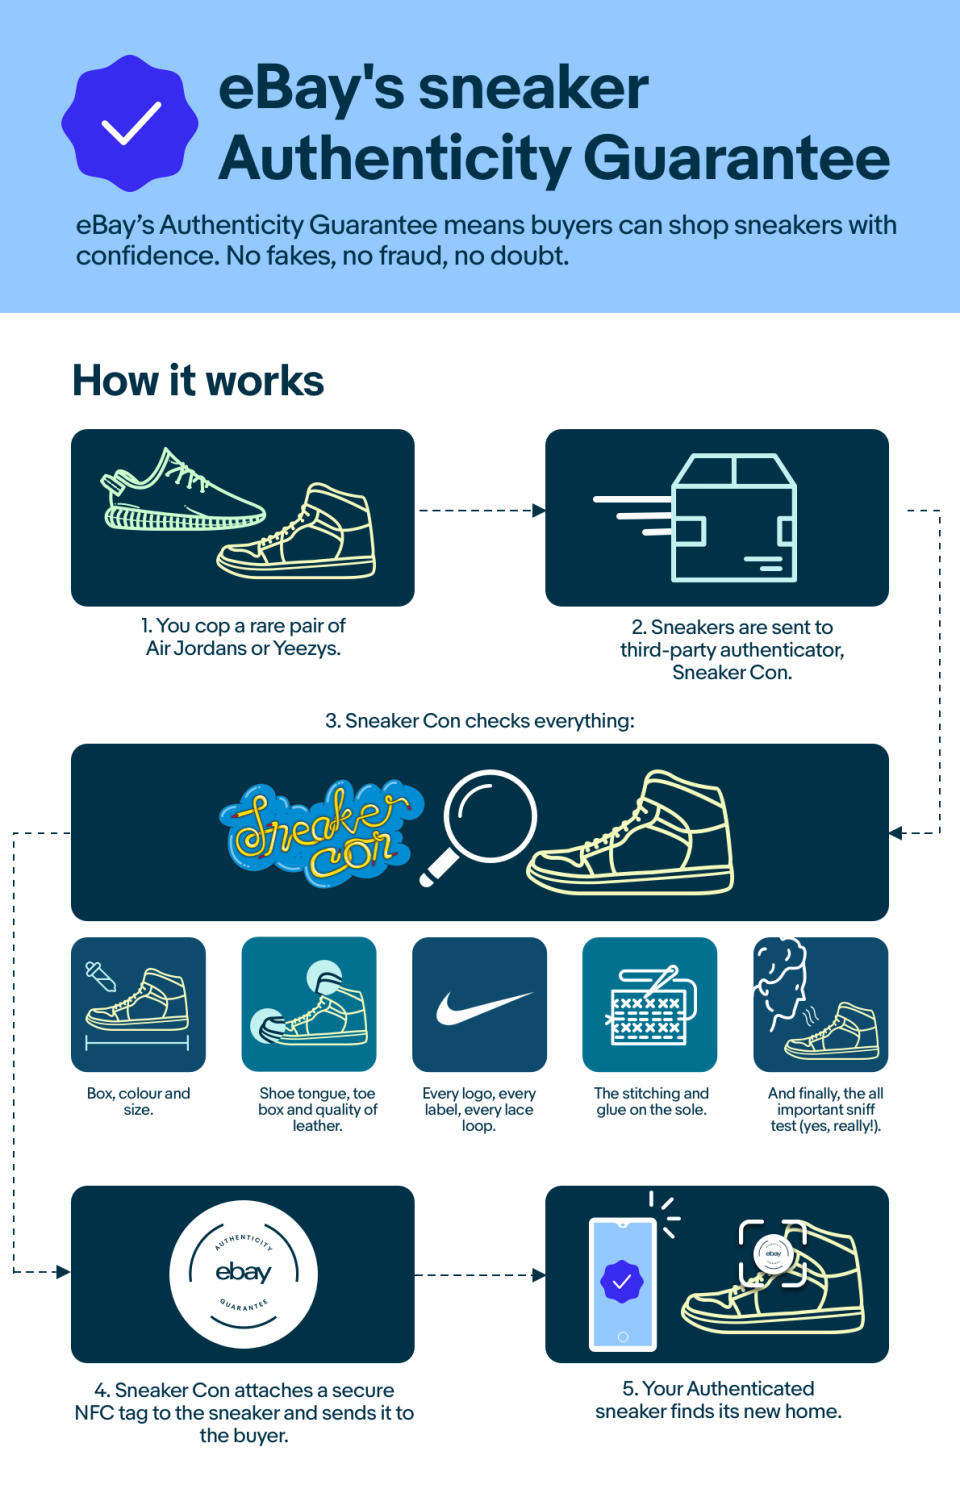 An infographic showing how eBay's sneaker authentication process works.